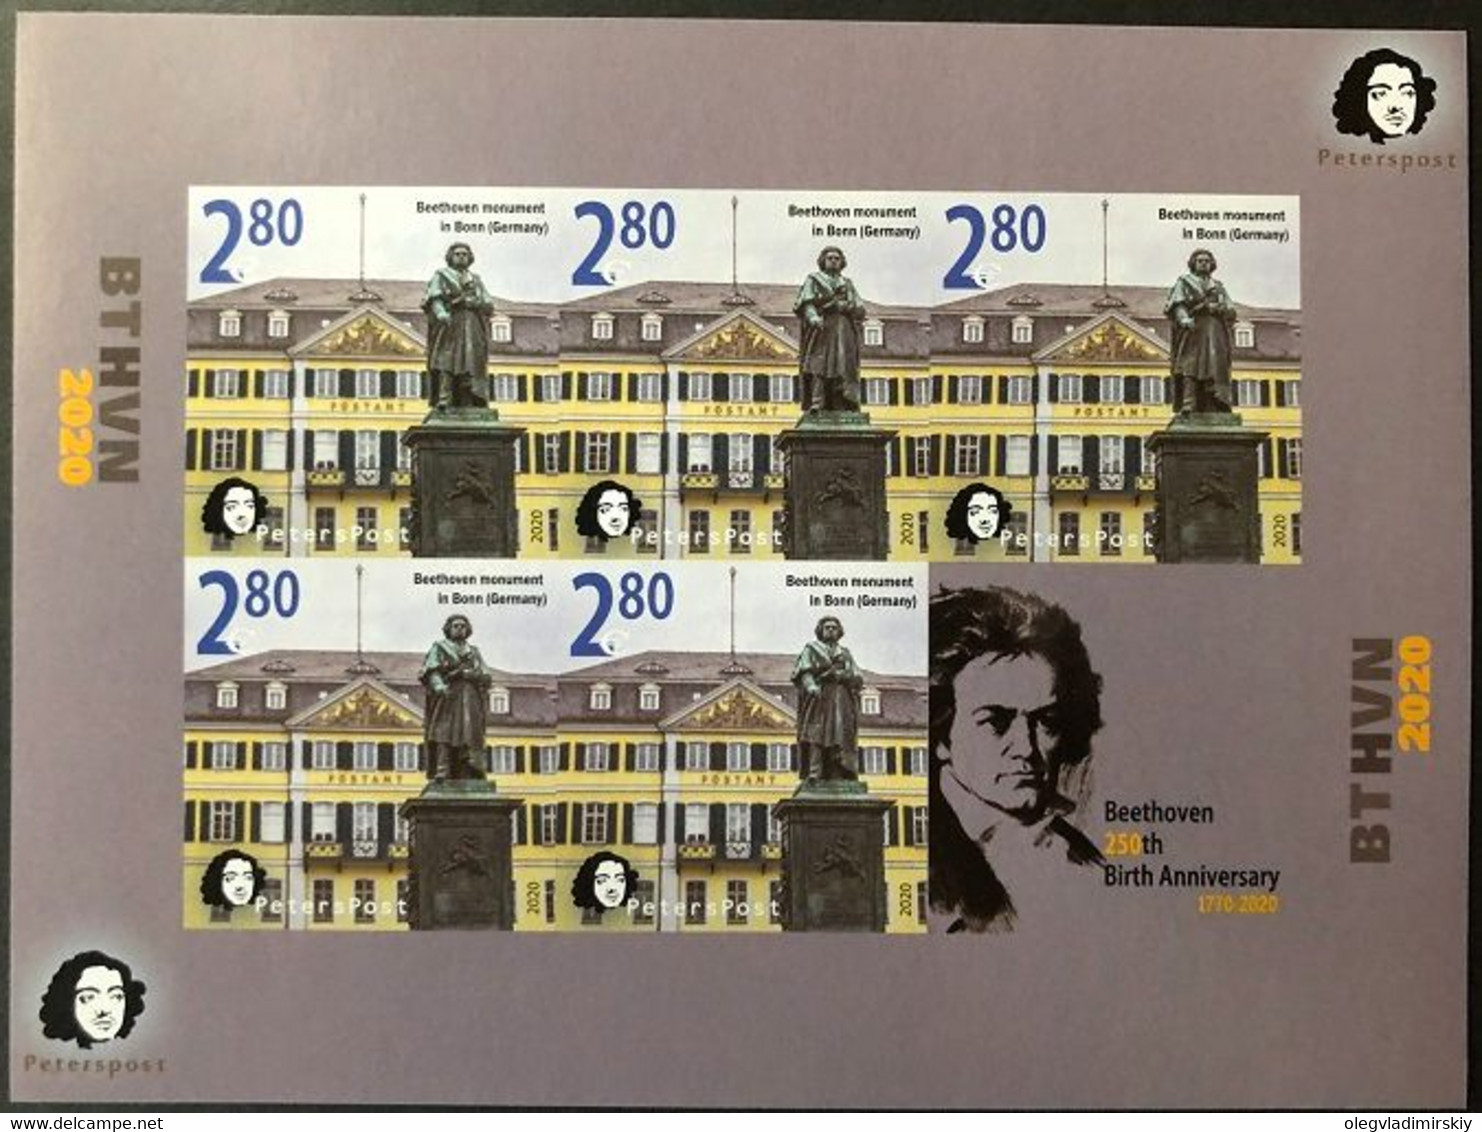 Finland 2020 BTHVN 250 Ann Monument In Bonn (Germany) Peterspost Sheetlet Of 5 Imperforated Stamps And Label Rare - Ongebruikt